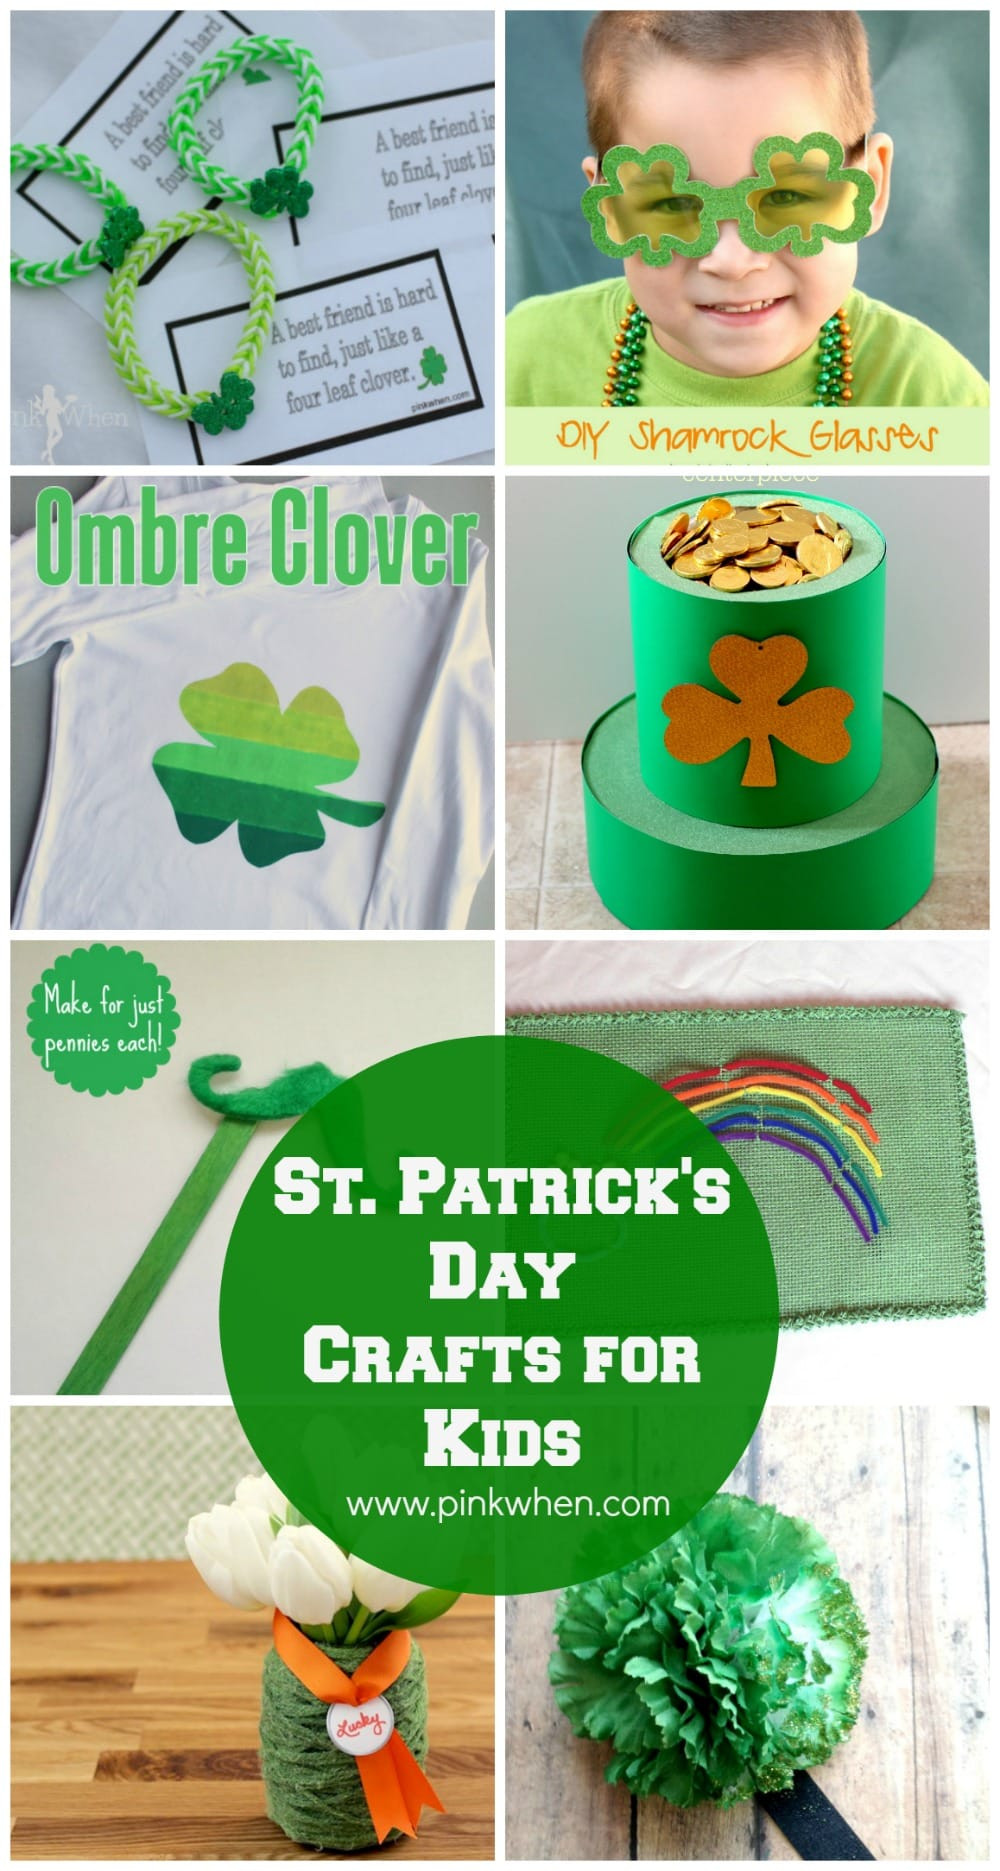 Pinterest St Patrick's Day Crafts
 10 St Patrick s Day Crafts for Kids PinkWhen